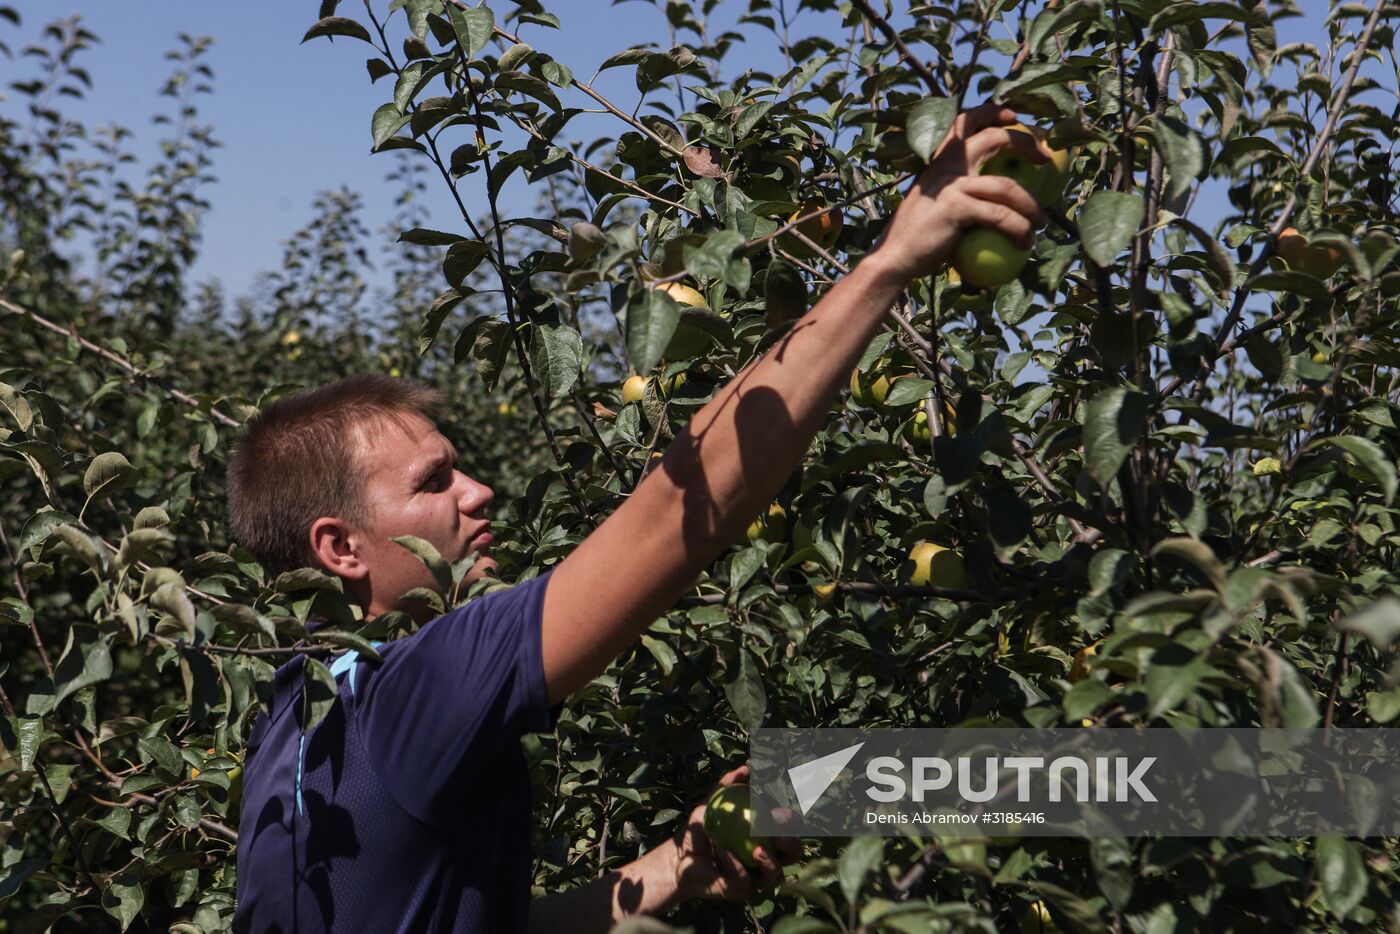 Harvesting apples and plums in Stavropol Territory